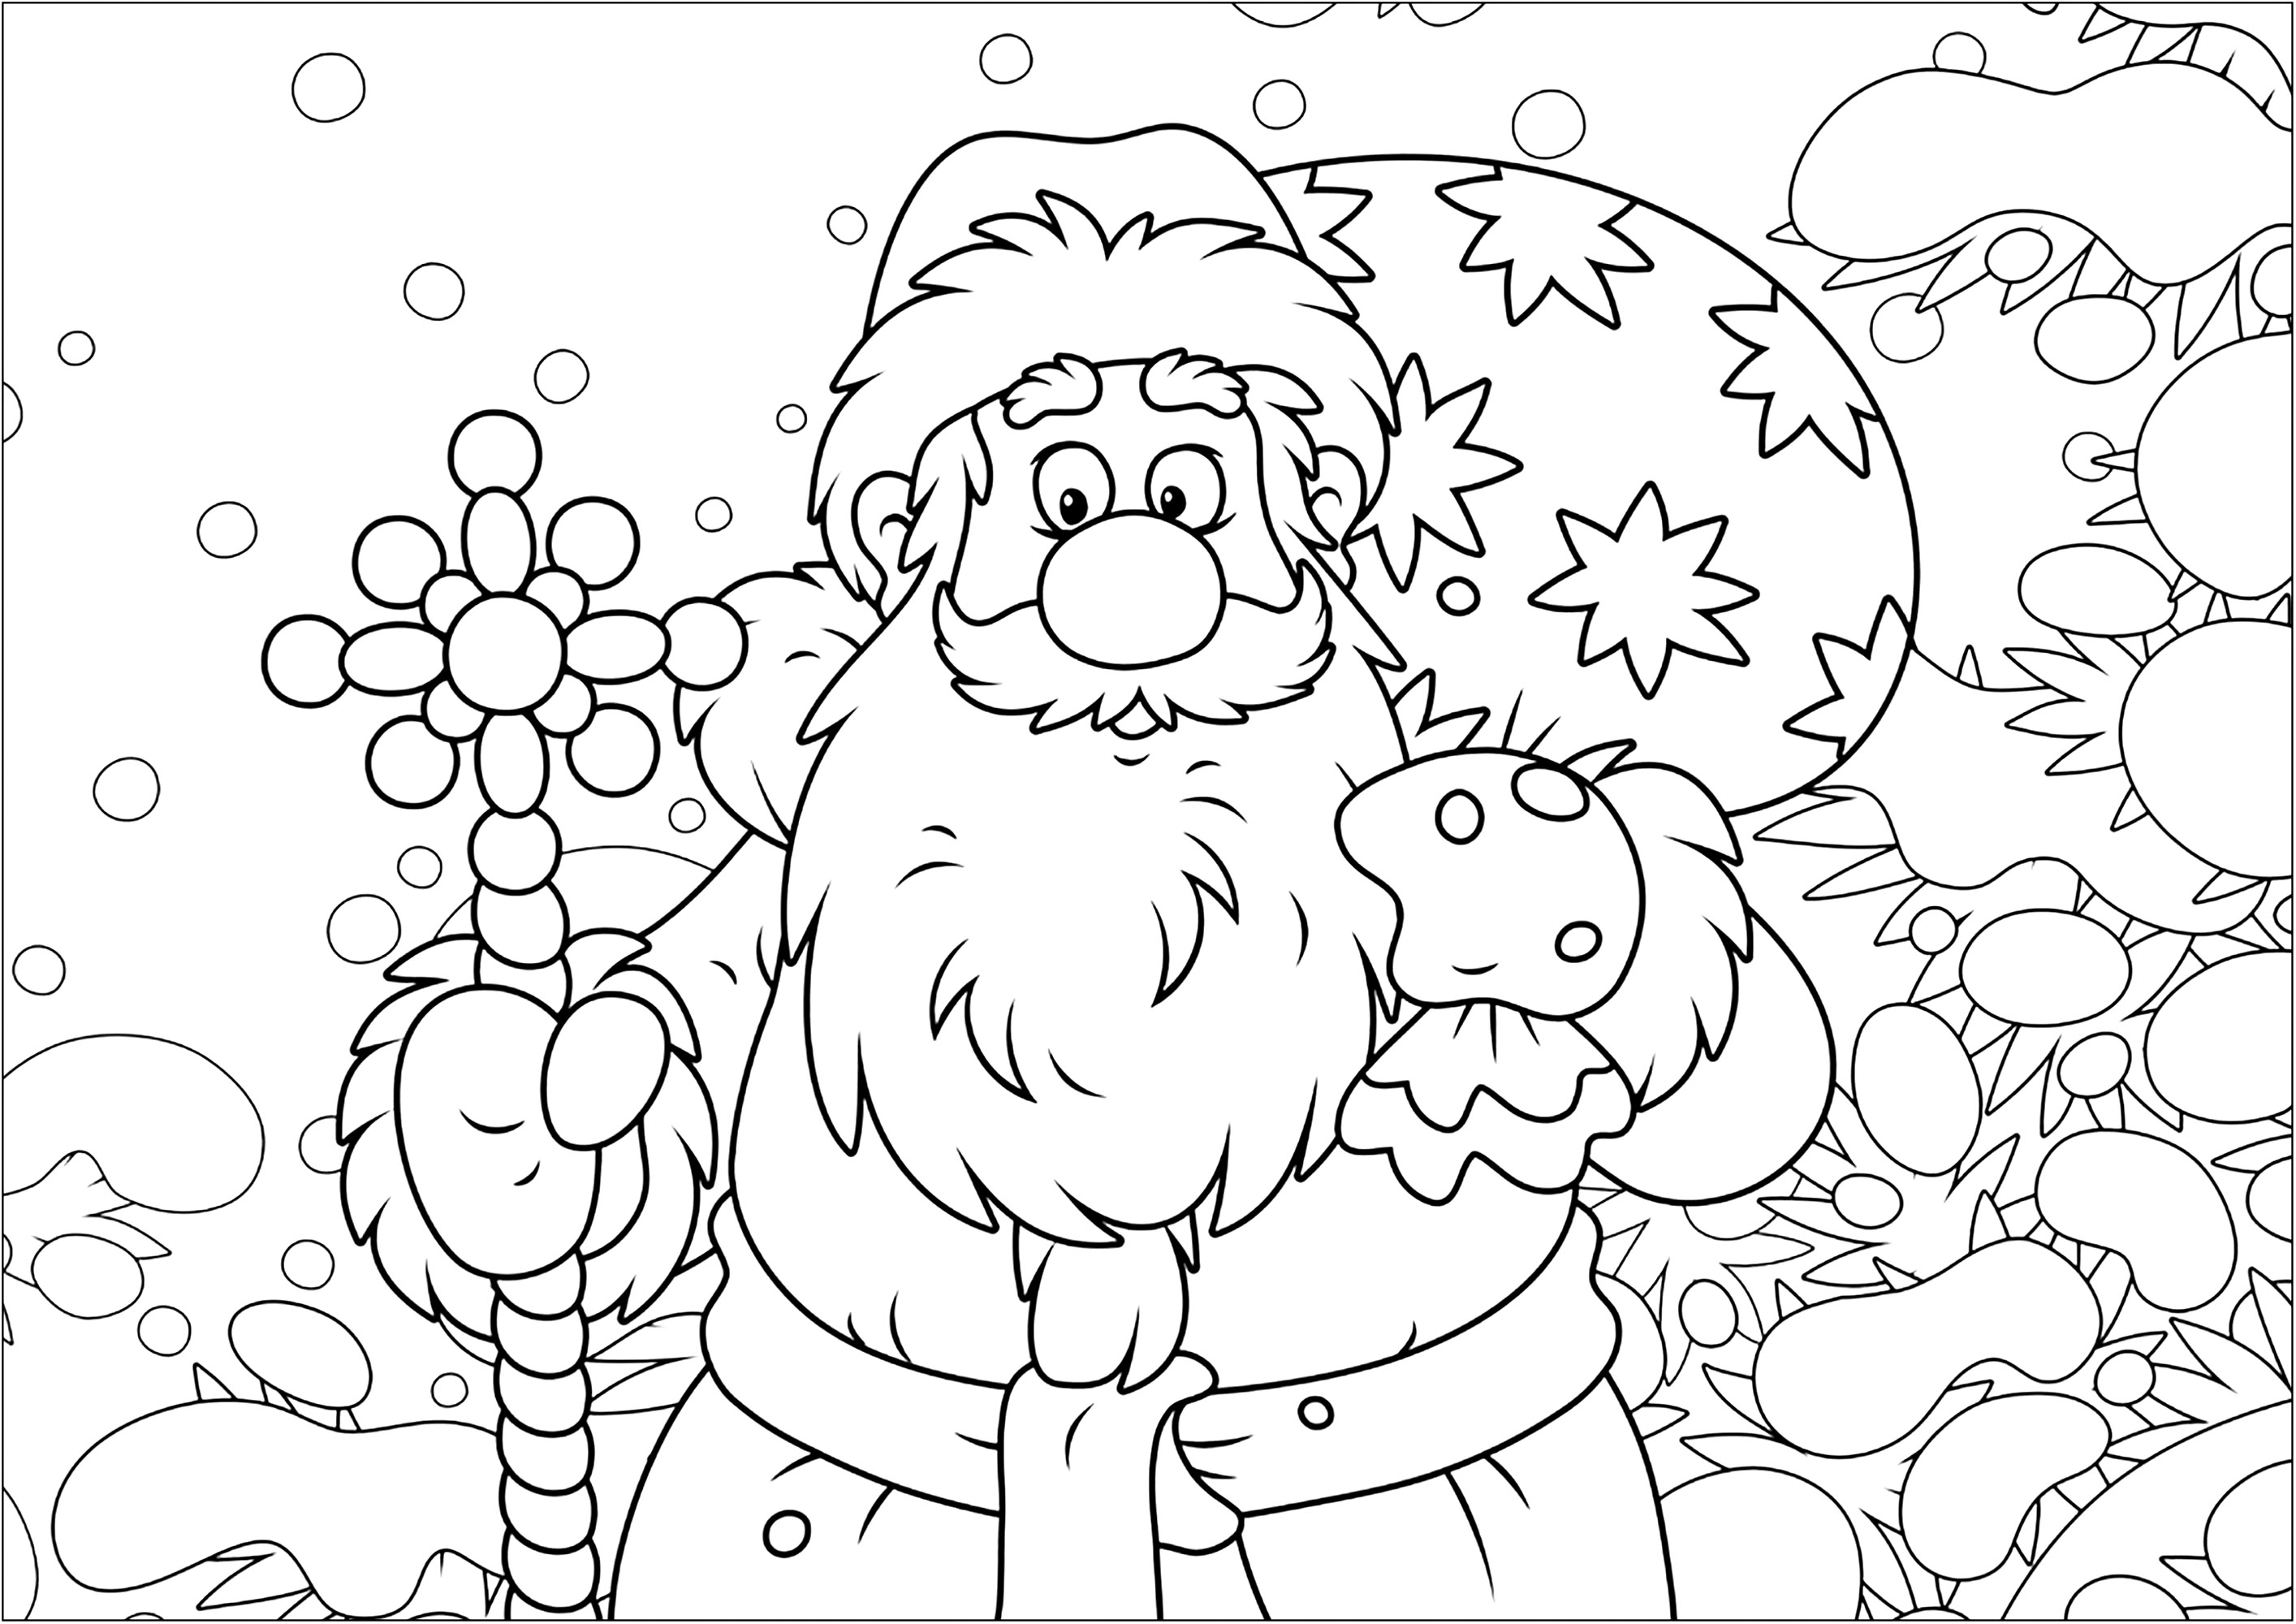 Pretty Santa and his sack full of presents. A pretty Christmas coloring page, with a snowy landscape and a Santa drawn in a very 'cartoon' style, Source : 123rf   Artist : Alex. Bannykh